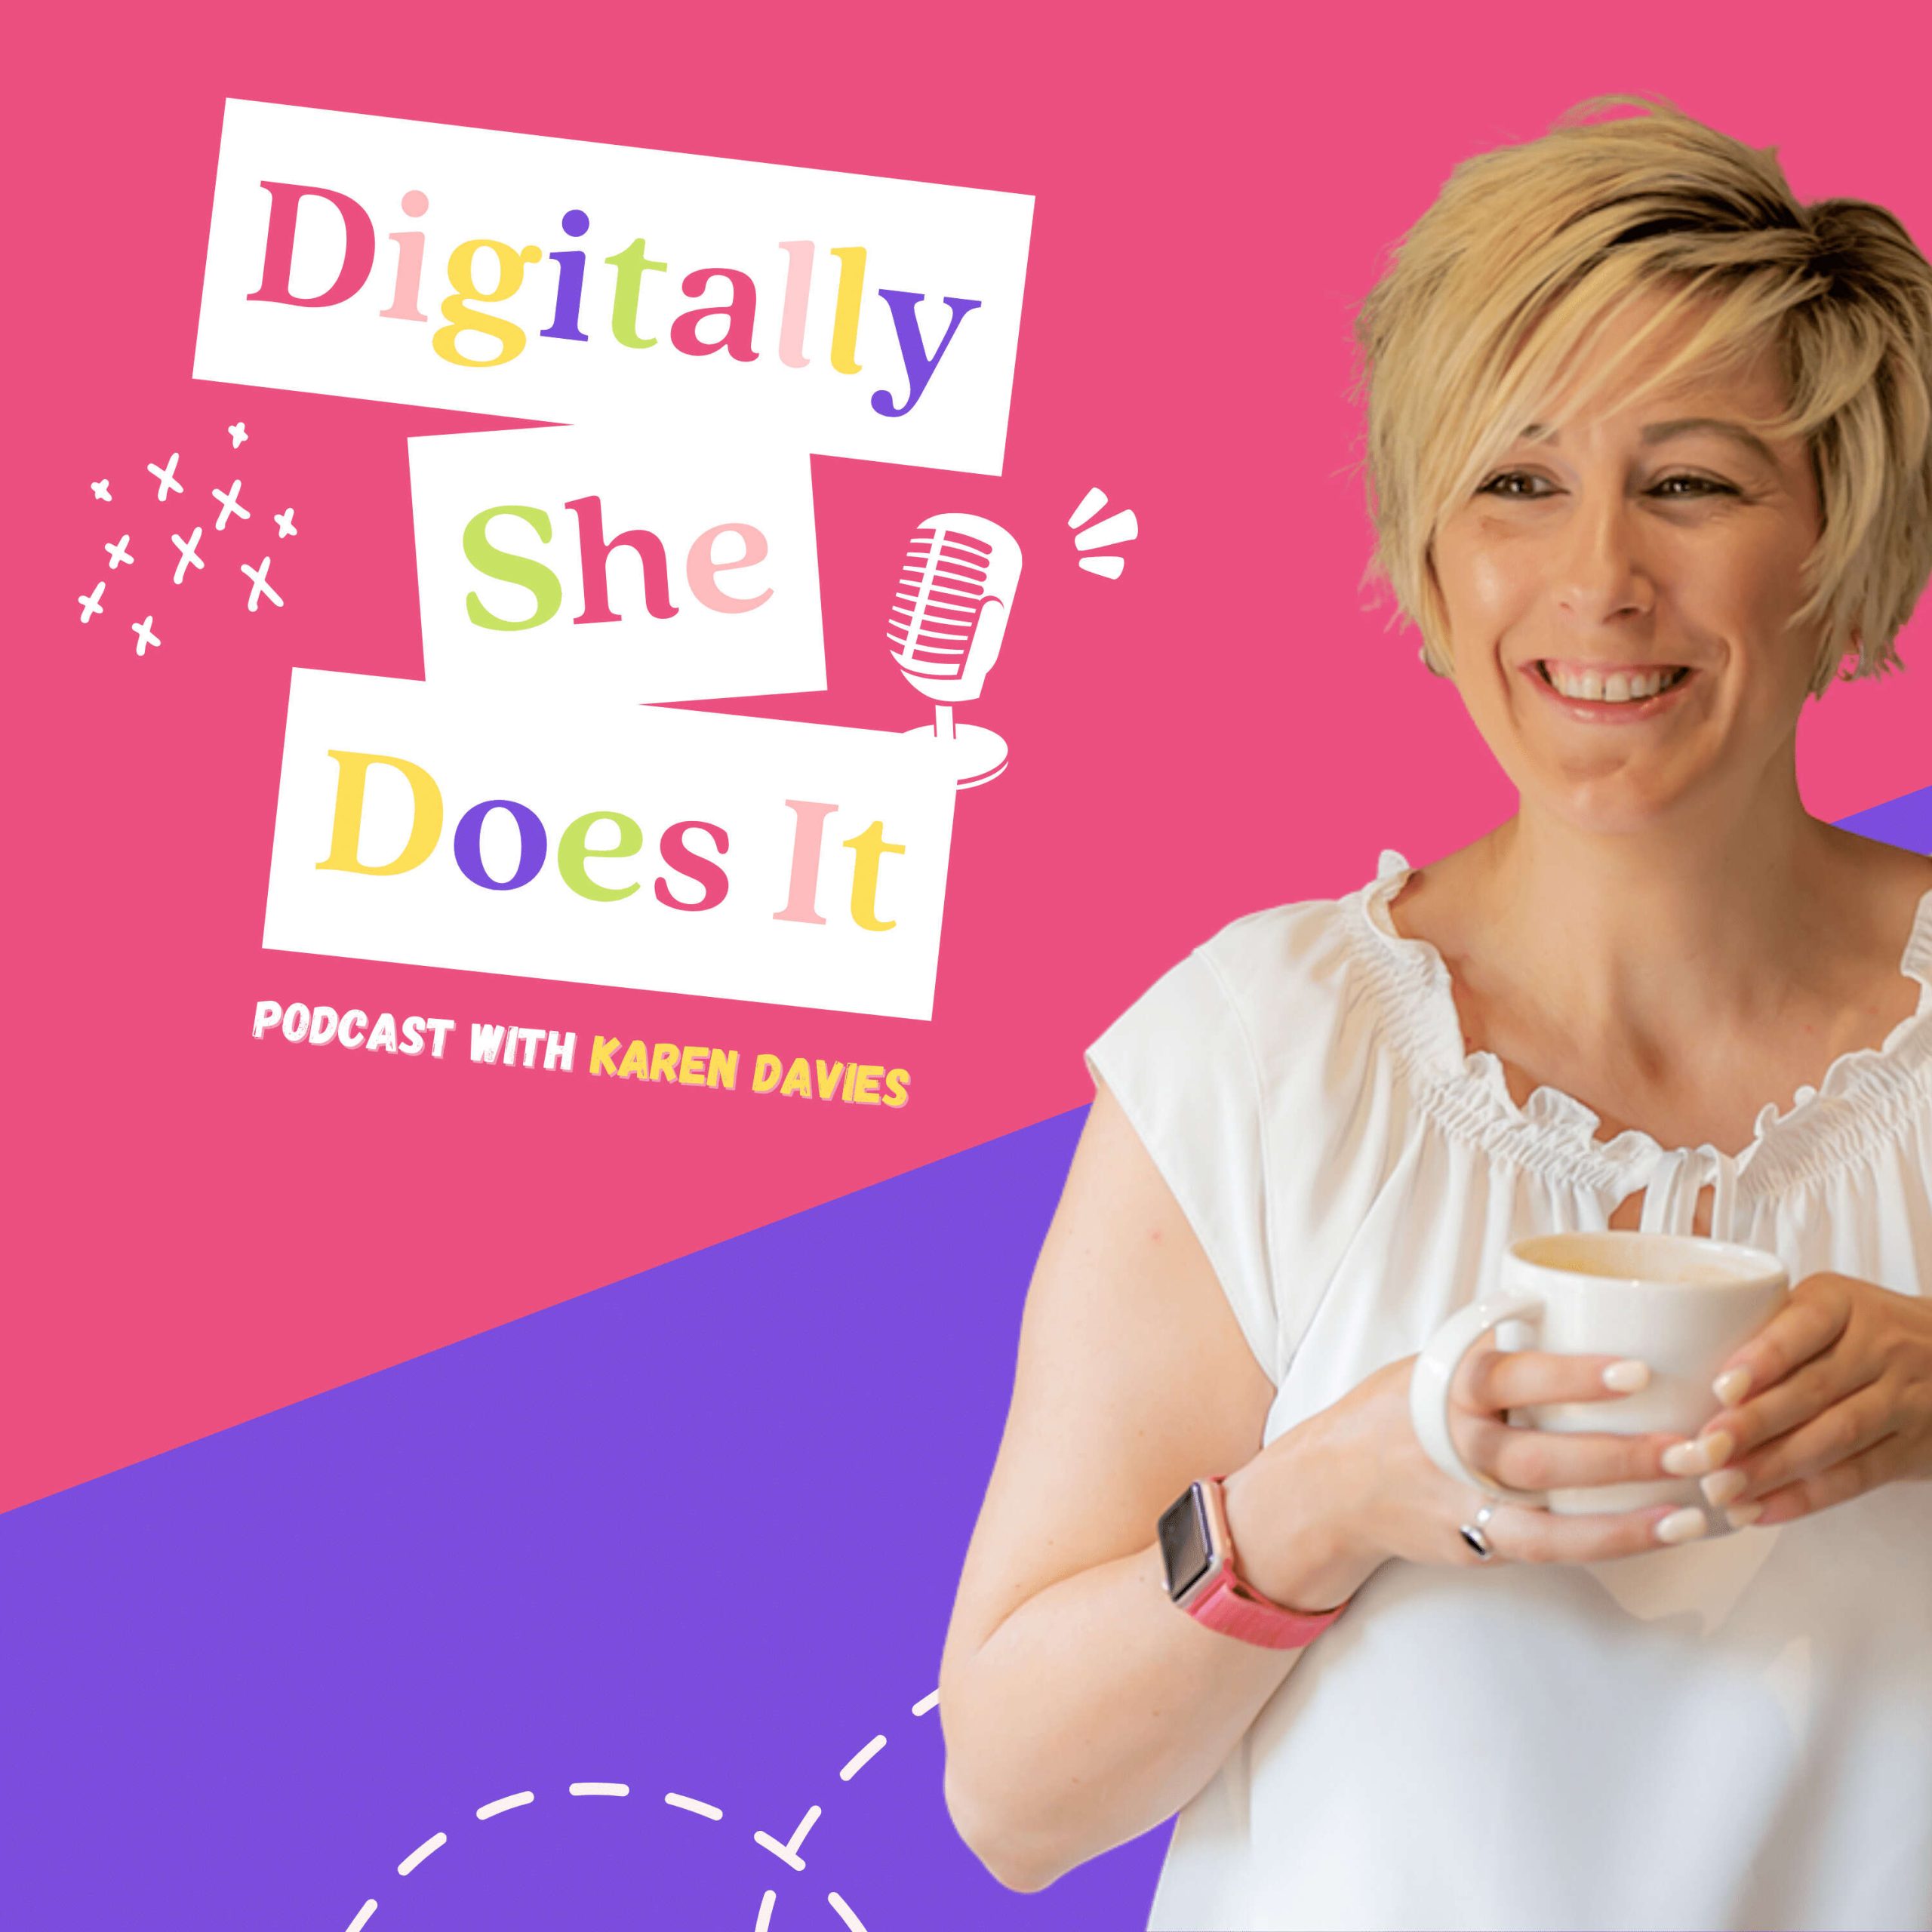 Digitally She Does It! Podcast